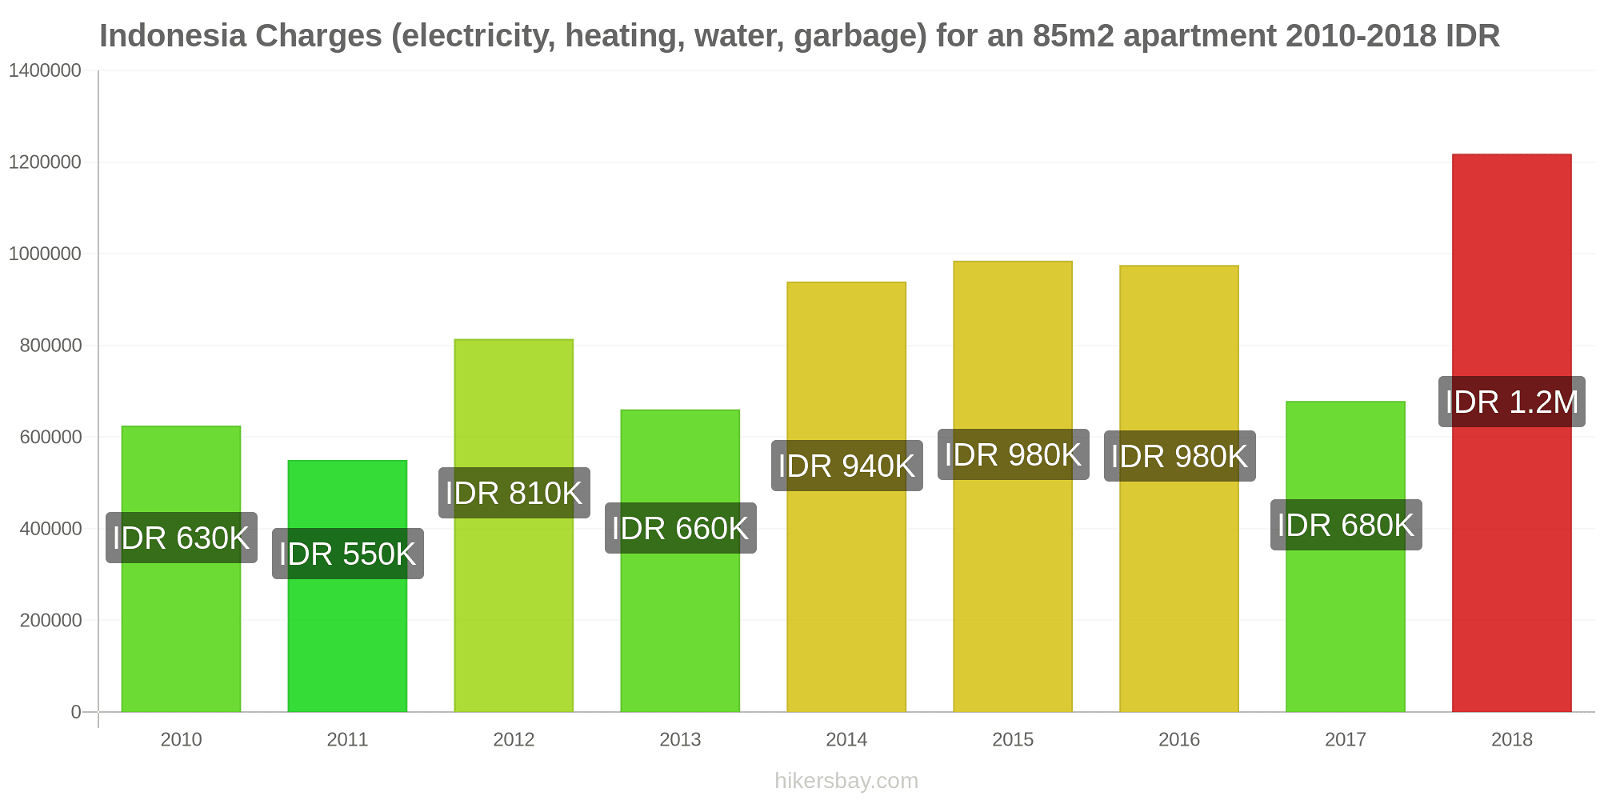 Indonesia price changes Utilities (electricity, heating, water, garbage) for an 85m2 apartment hikersbay.com